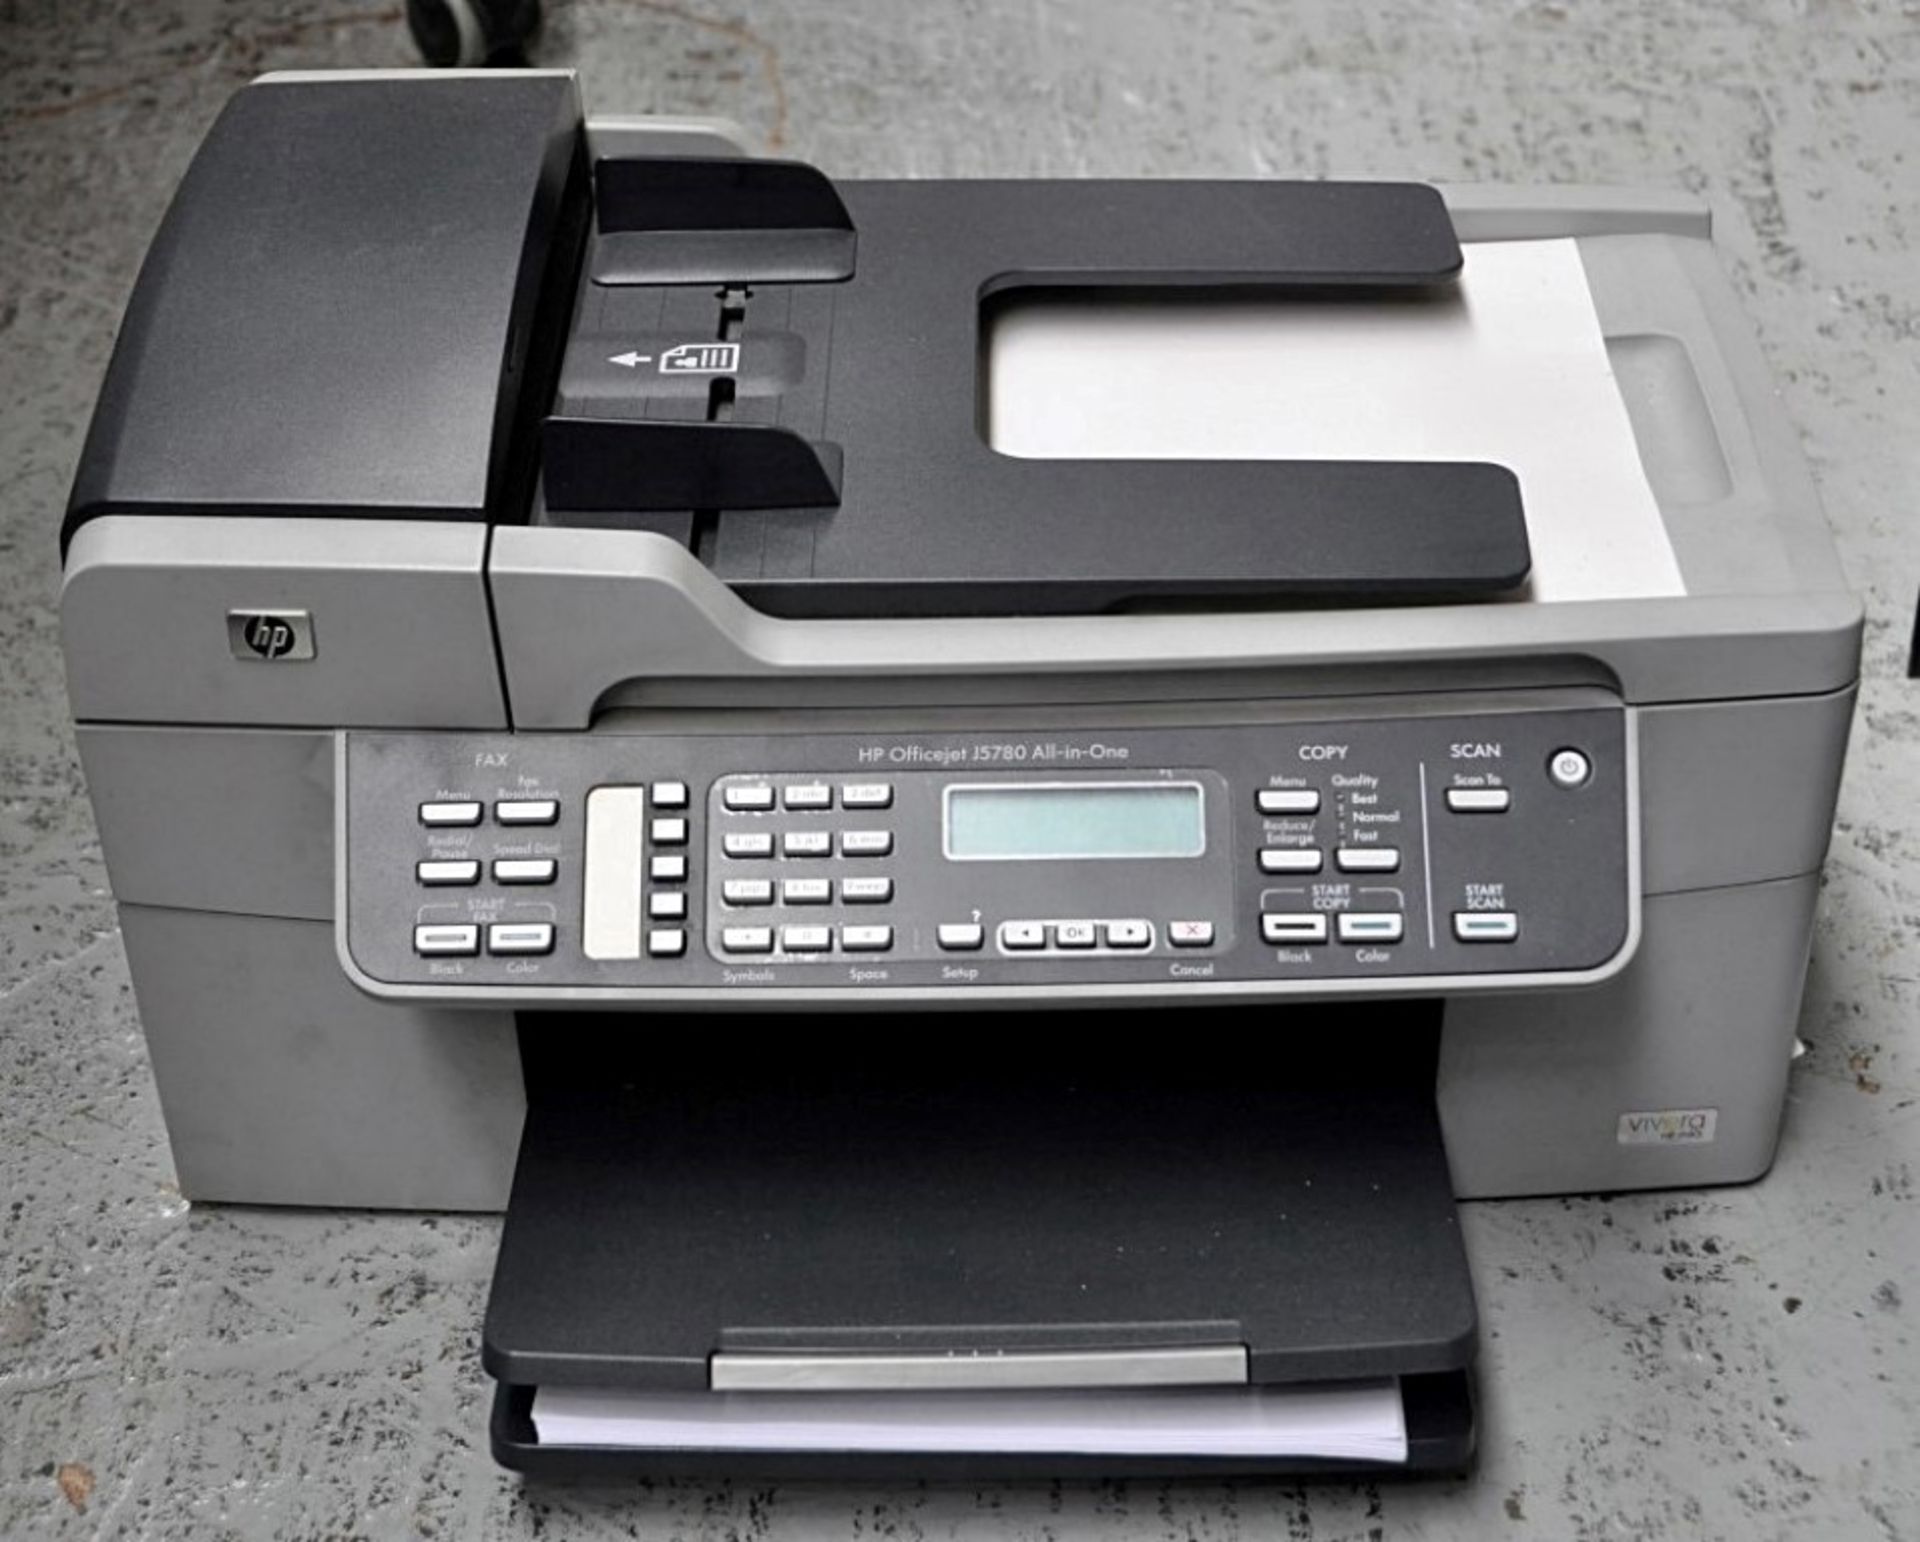 2 x Office Printers - Lot Includes: 1 x HP Officejet JS780 & 1 x Epson Stylus D78 - Taken From A - Image 2 of 3